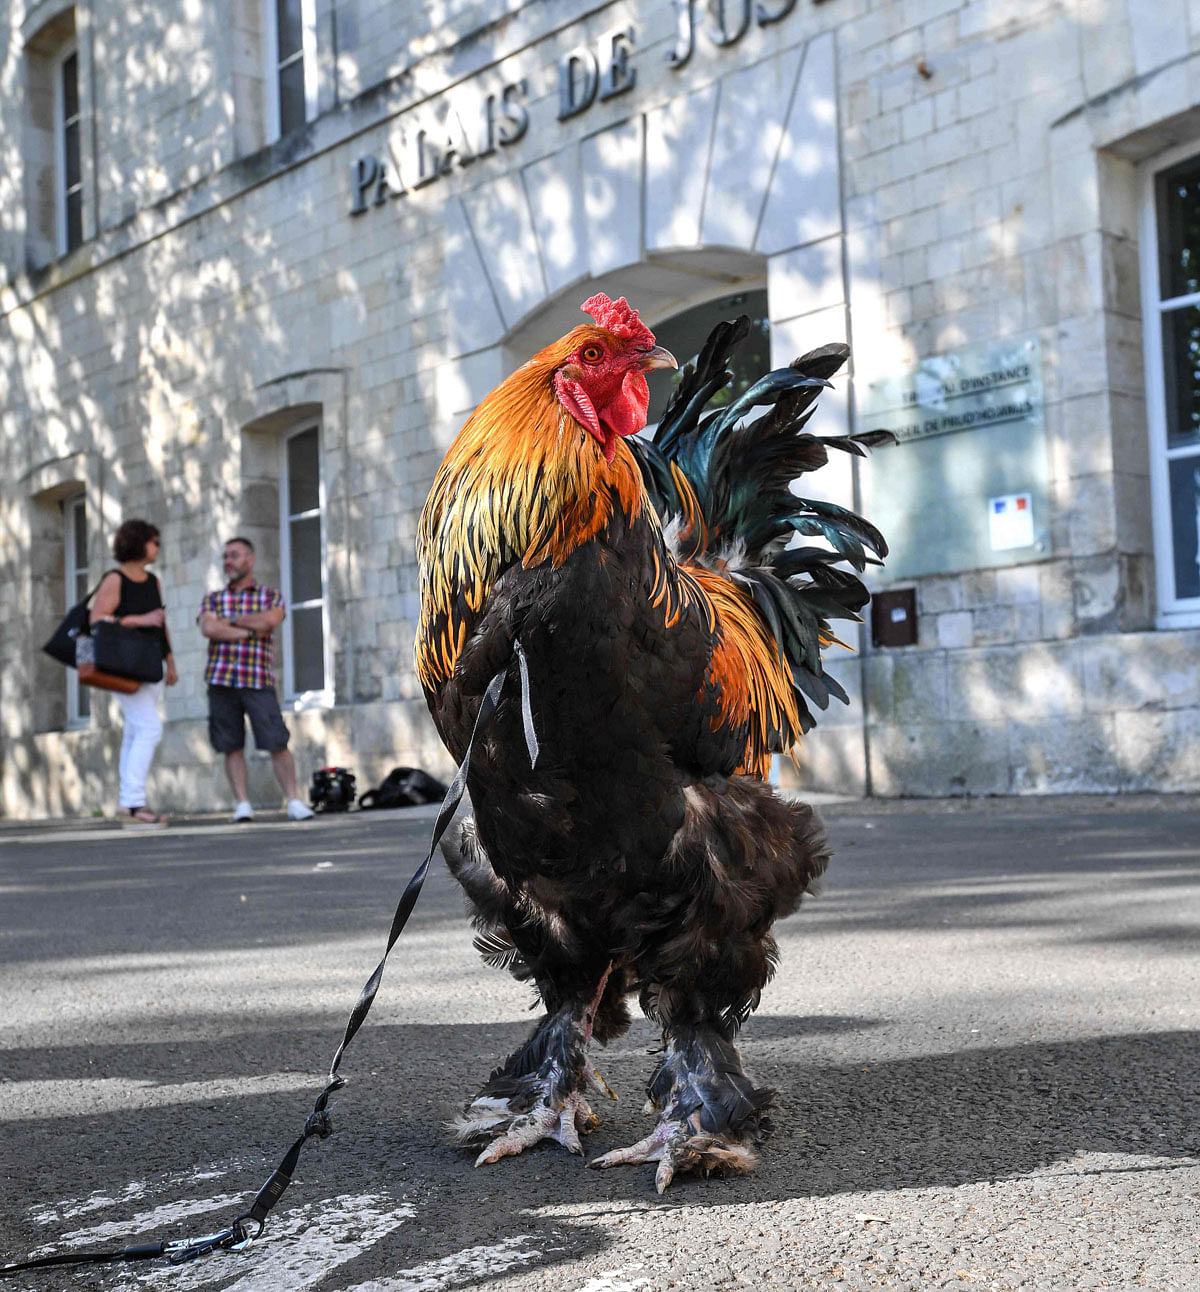 A rooster stands outside the high court (Tribunal de Grande Instance) in Rochefort, western France, on 4 July 2019 where the justice is set to rule on whether a lively cockerel should be considered a neighbourly nuisance in a case that has led to shreiks of protest in the countryside. Photo: AFP